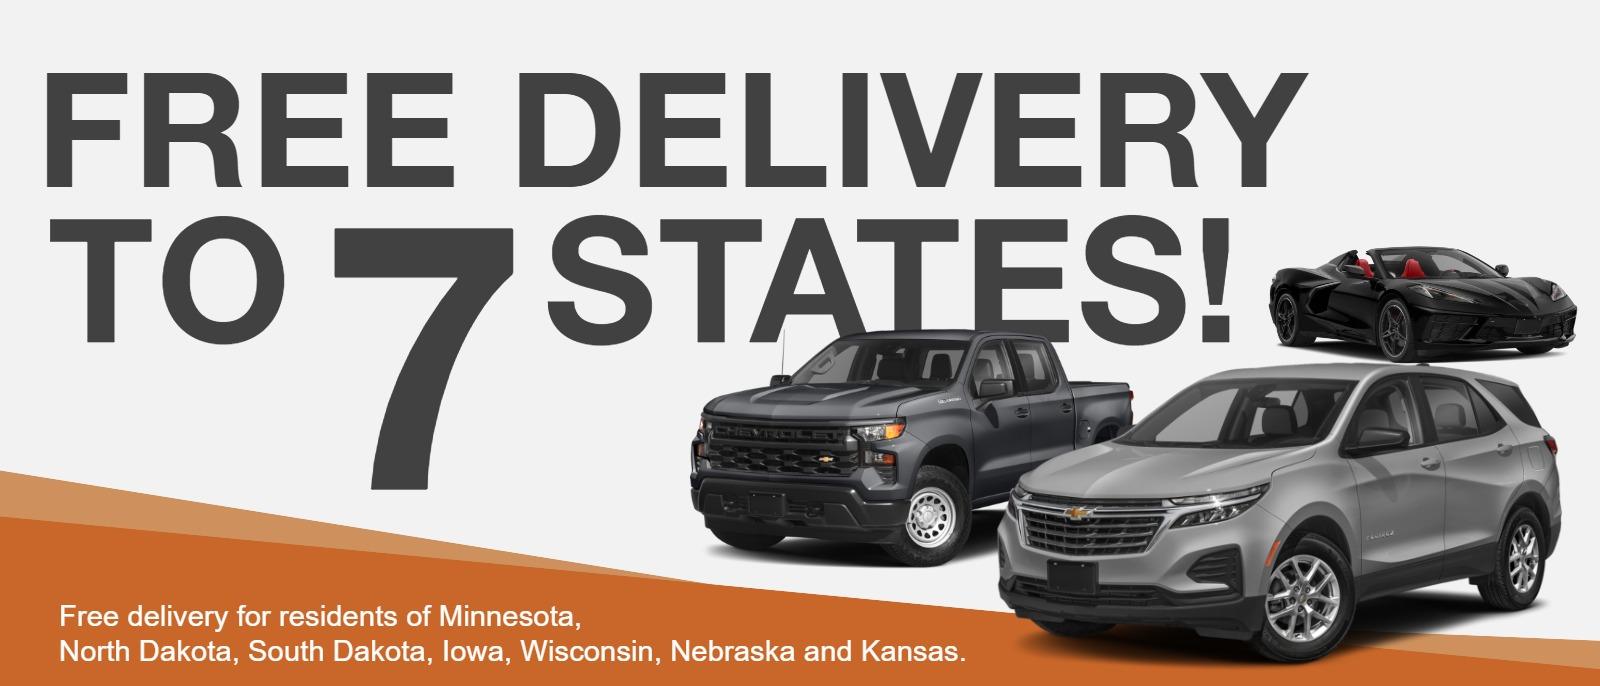 Free delivery to 7 states for Minnesota residents offers and deals near glenwood mn